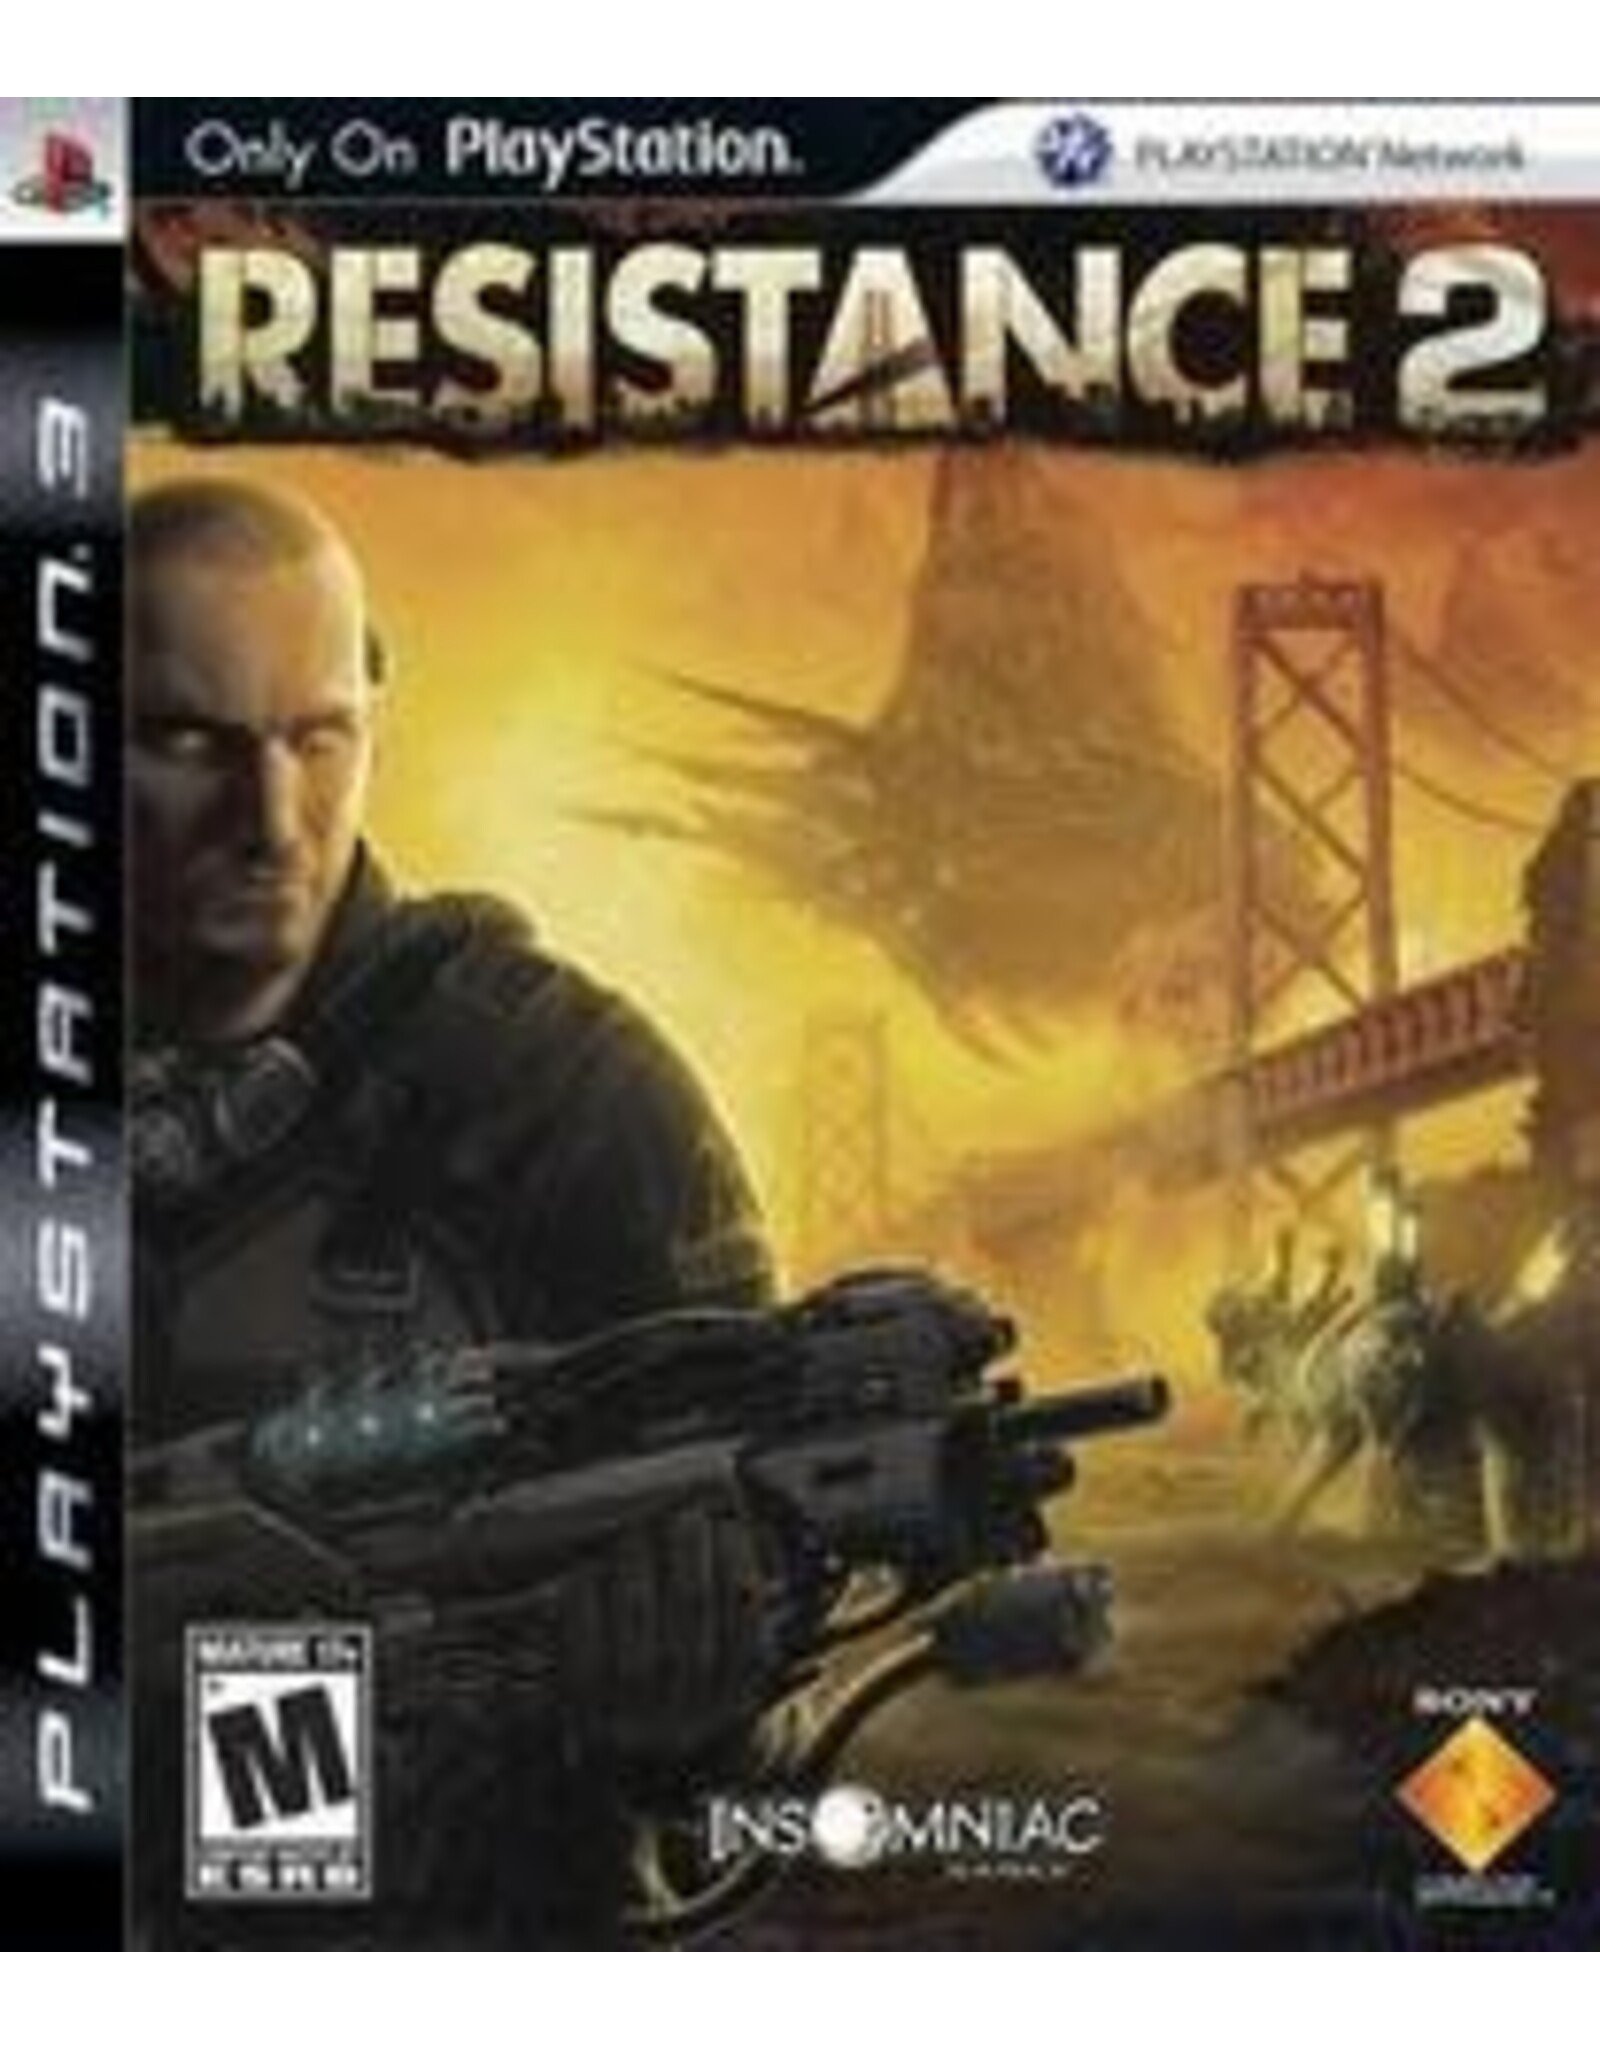 Playstation 3 Resistance 2 (Used)